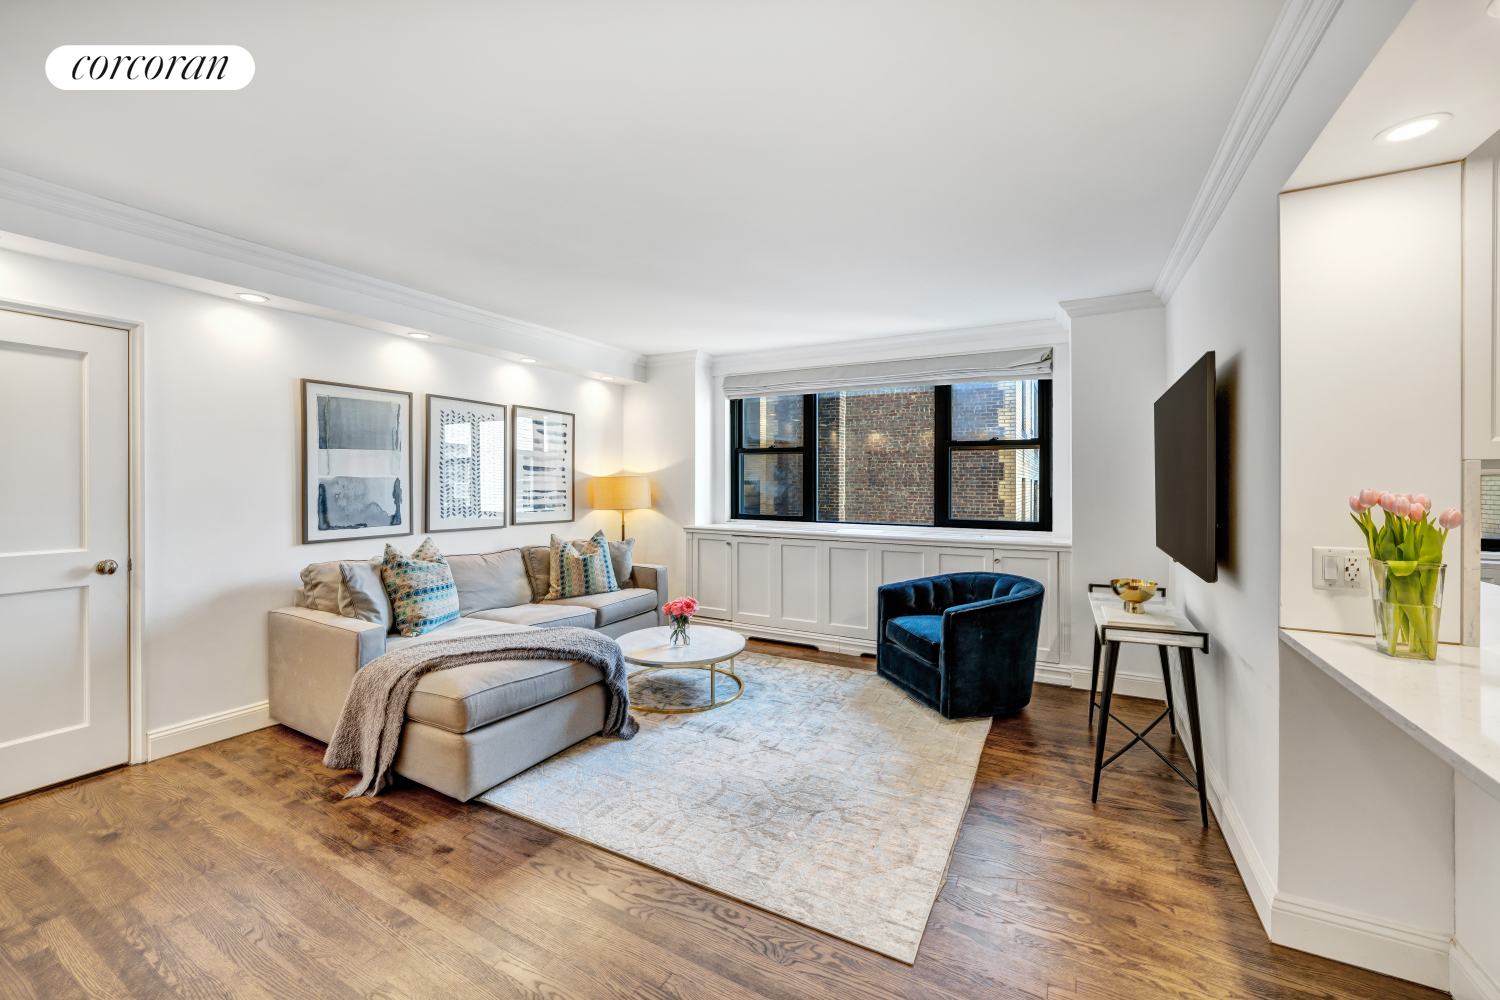 315 East 72nd Street 9Fg, Lenox Hill, Upper East Side, NYC - 2 Bedrooms  
2 Bathrooms  
4 Rooms - 